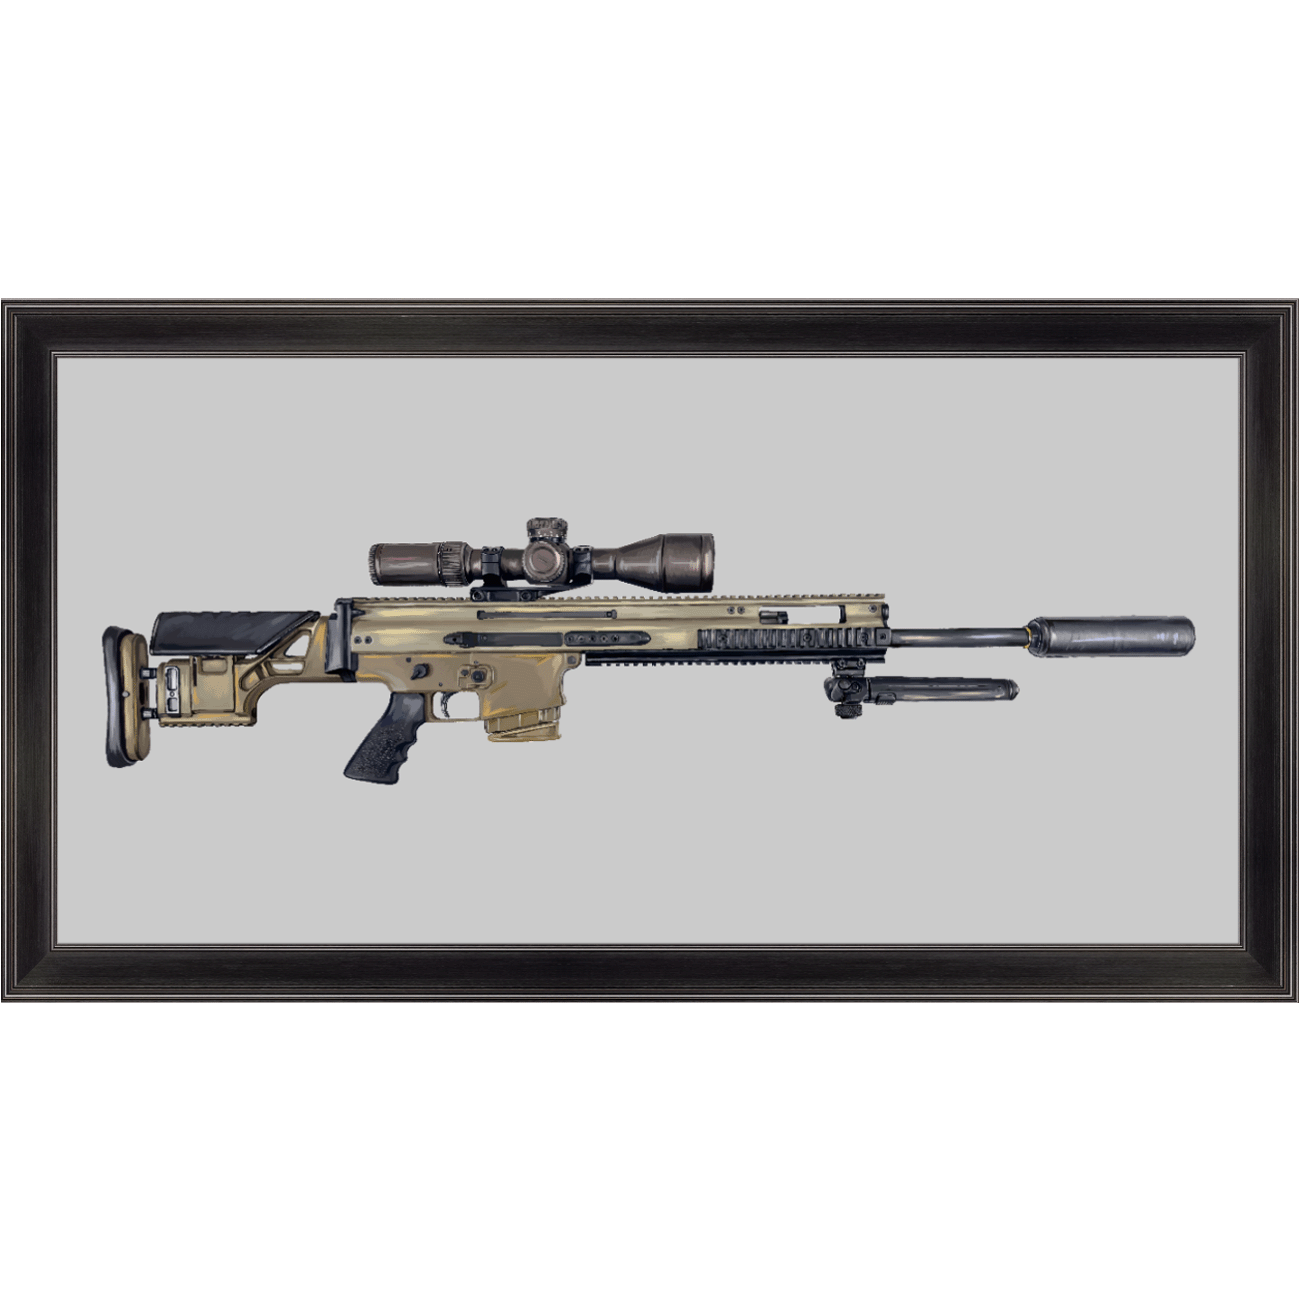 Socom Sniper Rifle Painting - Just The Piece